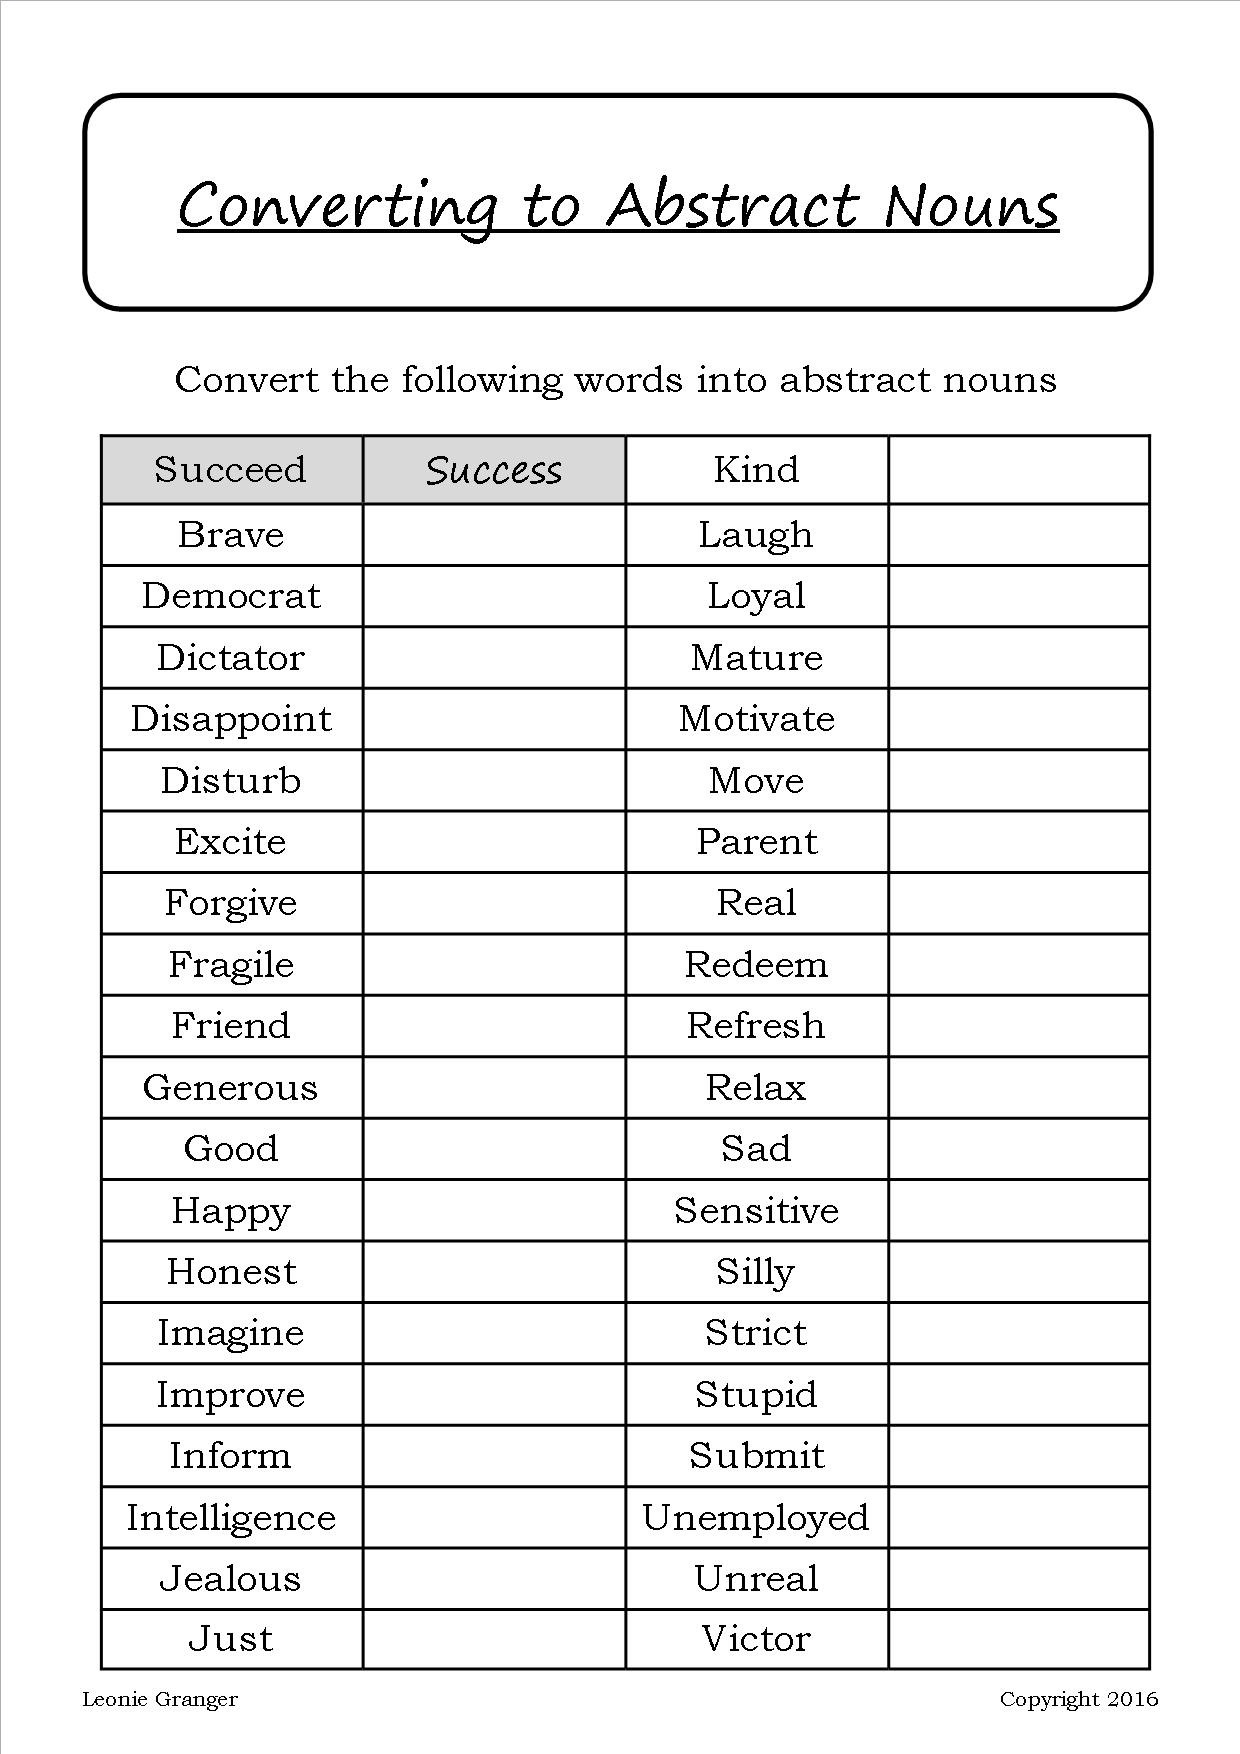 concrete-and-abstract-nouns-read-the-nouns-and-decide-whether-they-are-concrete-nouns-or